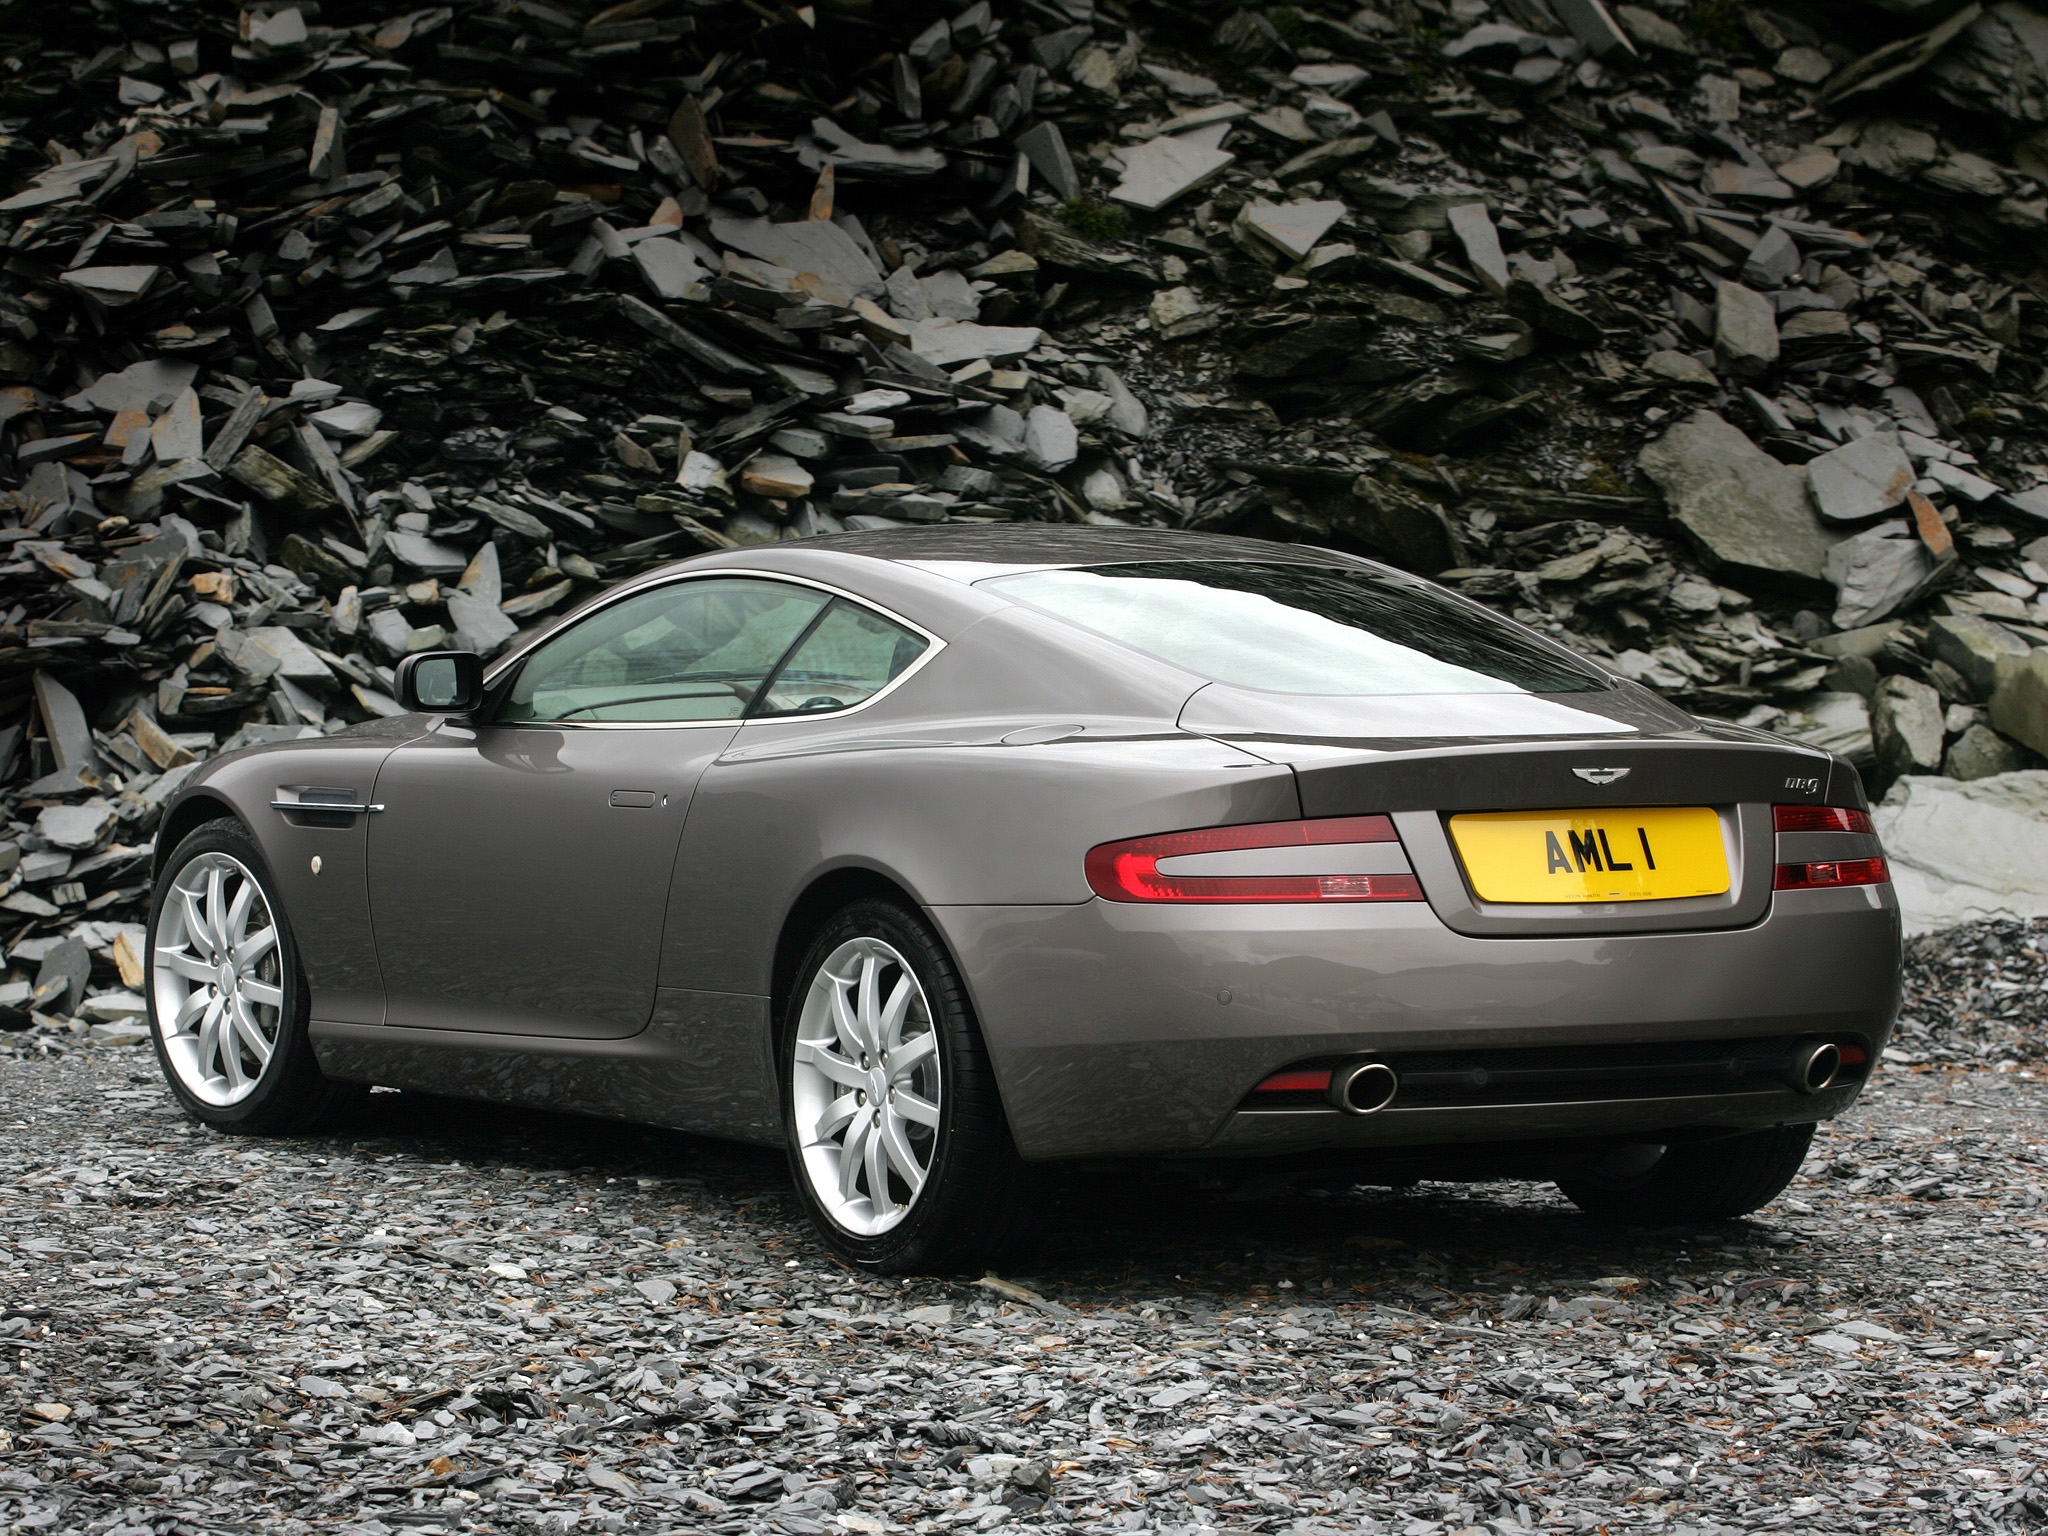 Download background cars, auto, aston martin, grey, back view, rear view, style, 2004, db9